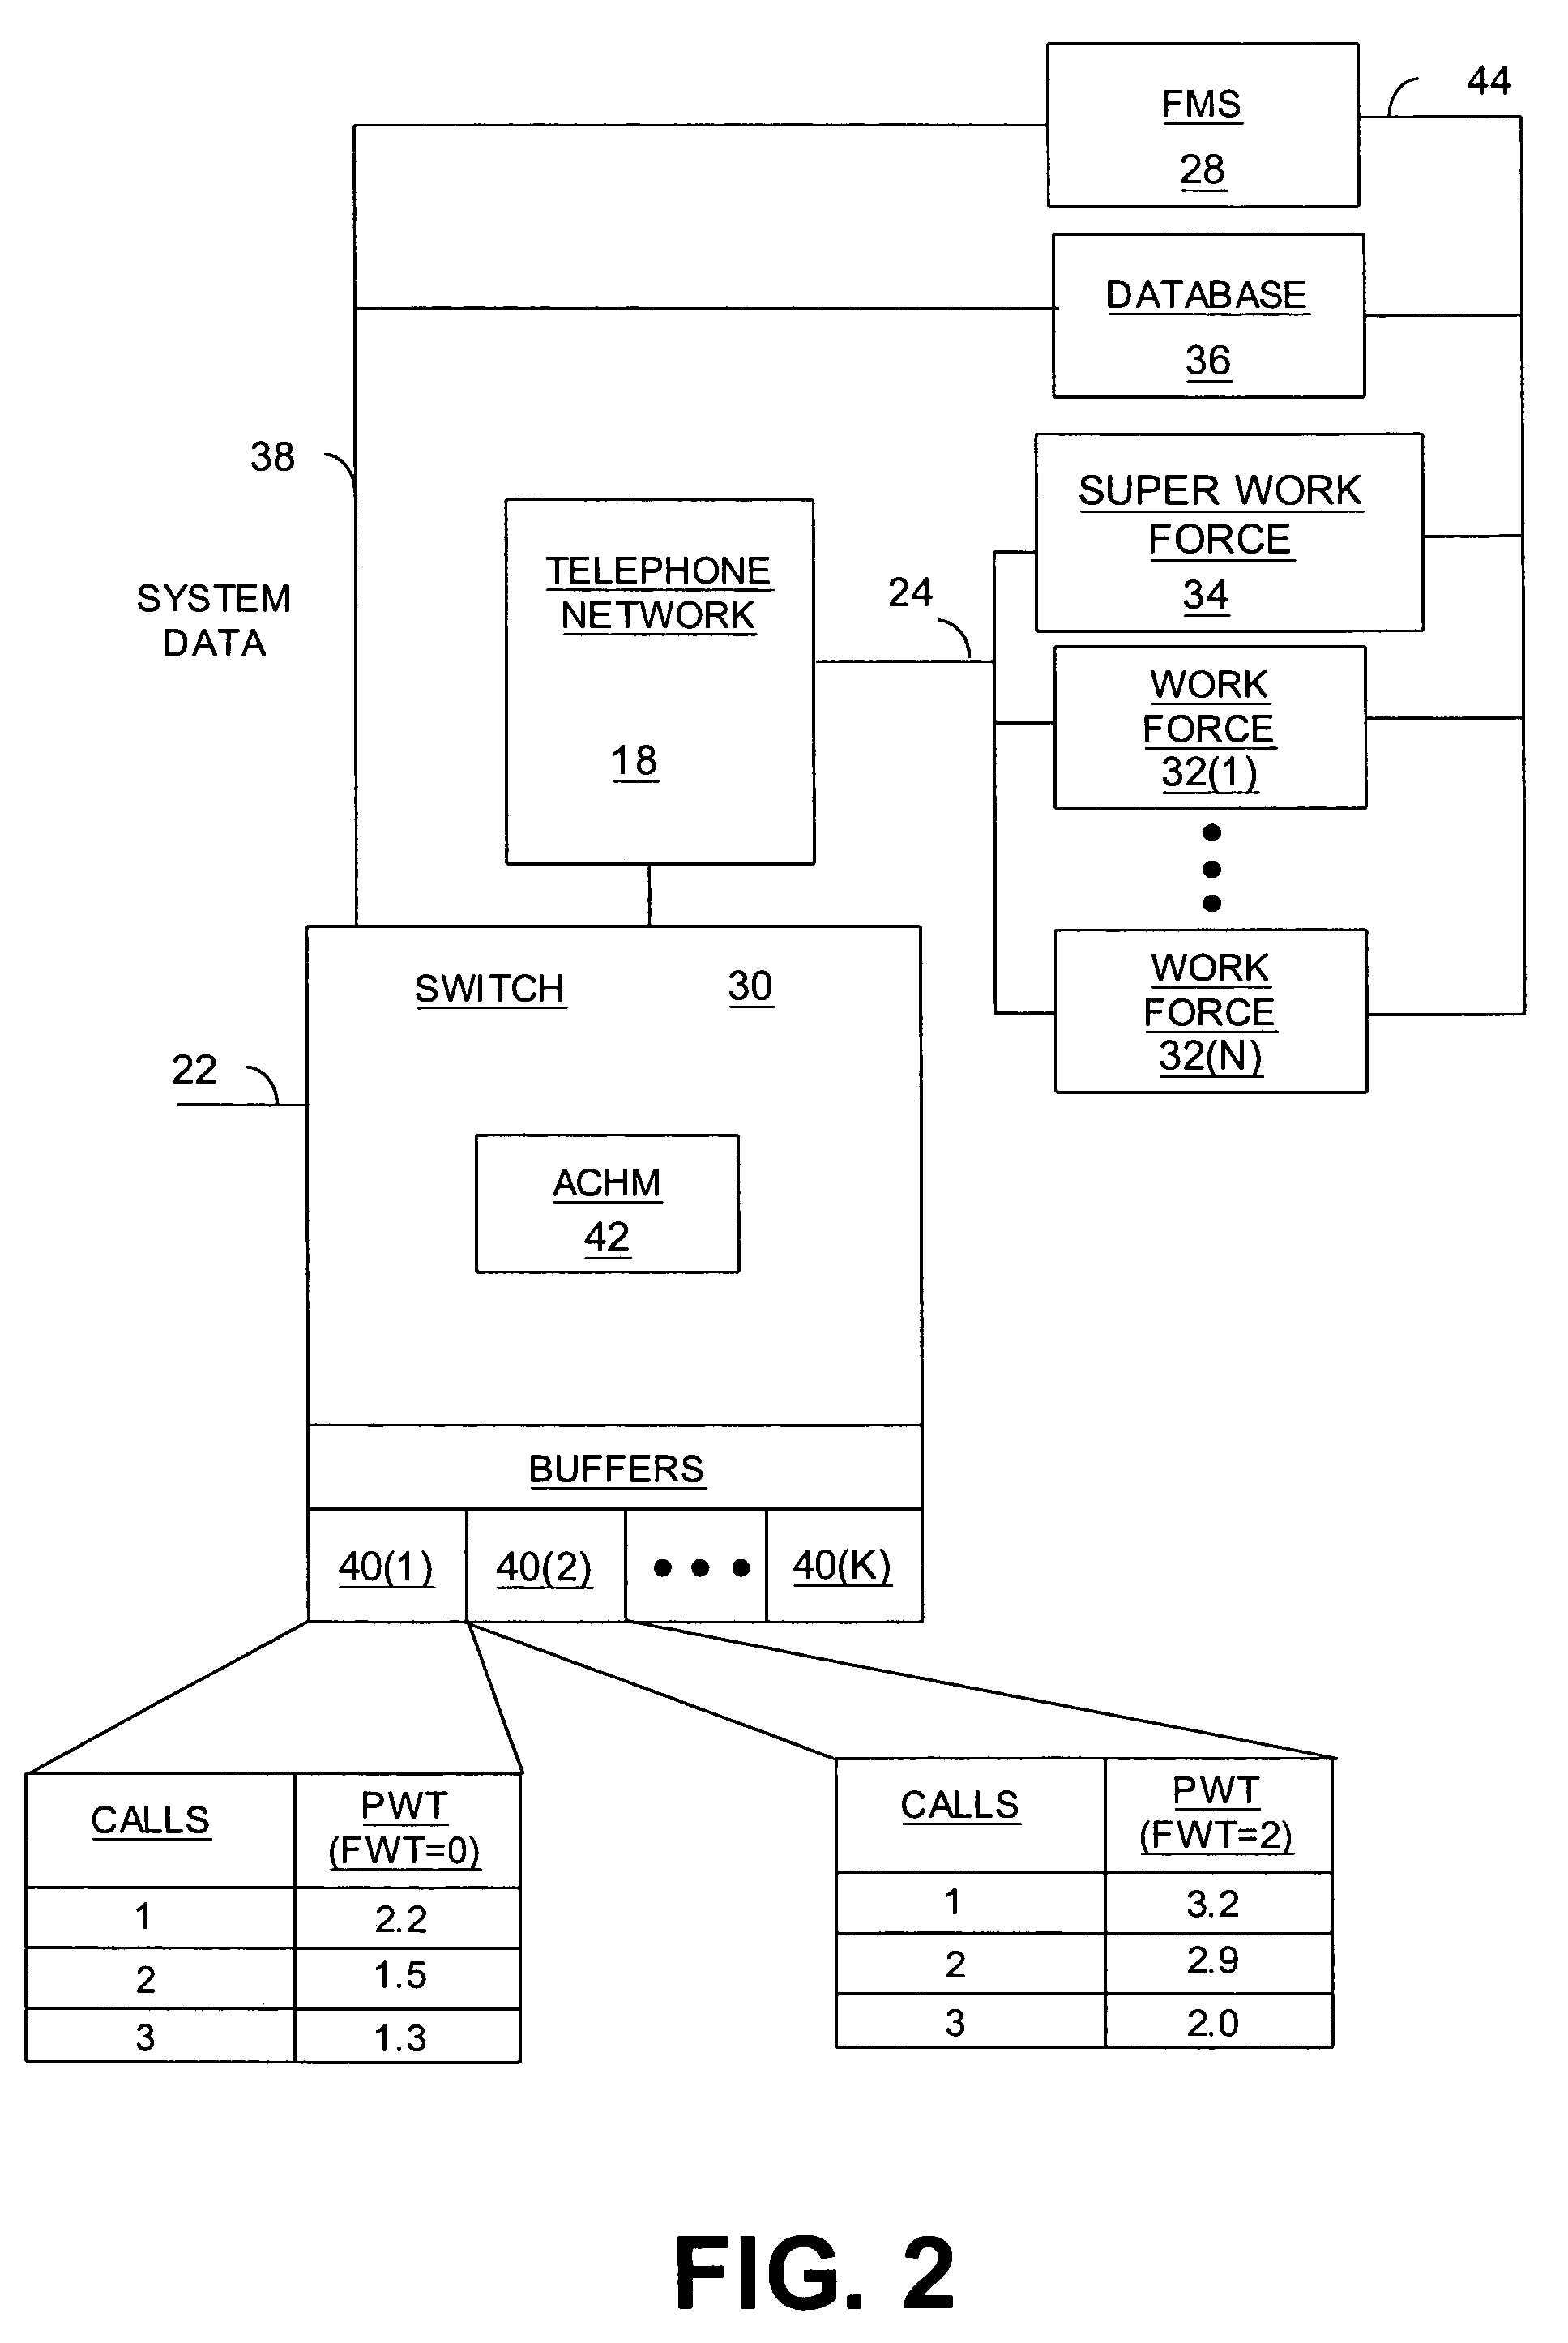 Method and system for predicting network usage in a network having re-occurring usage variations